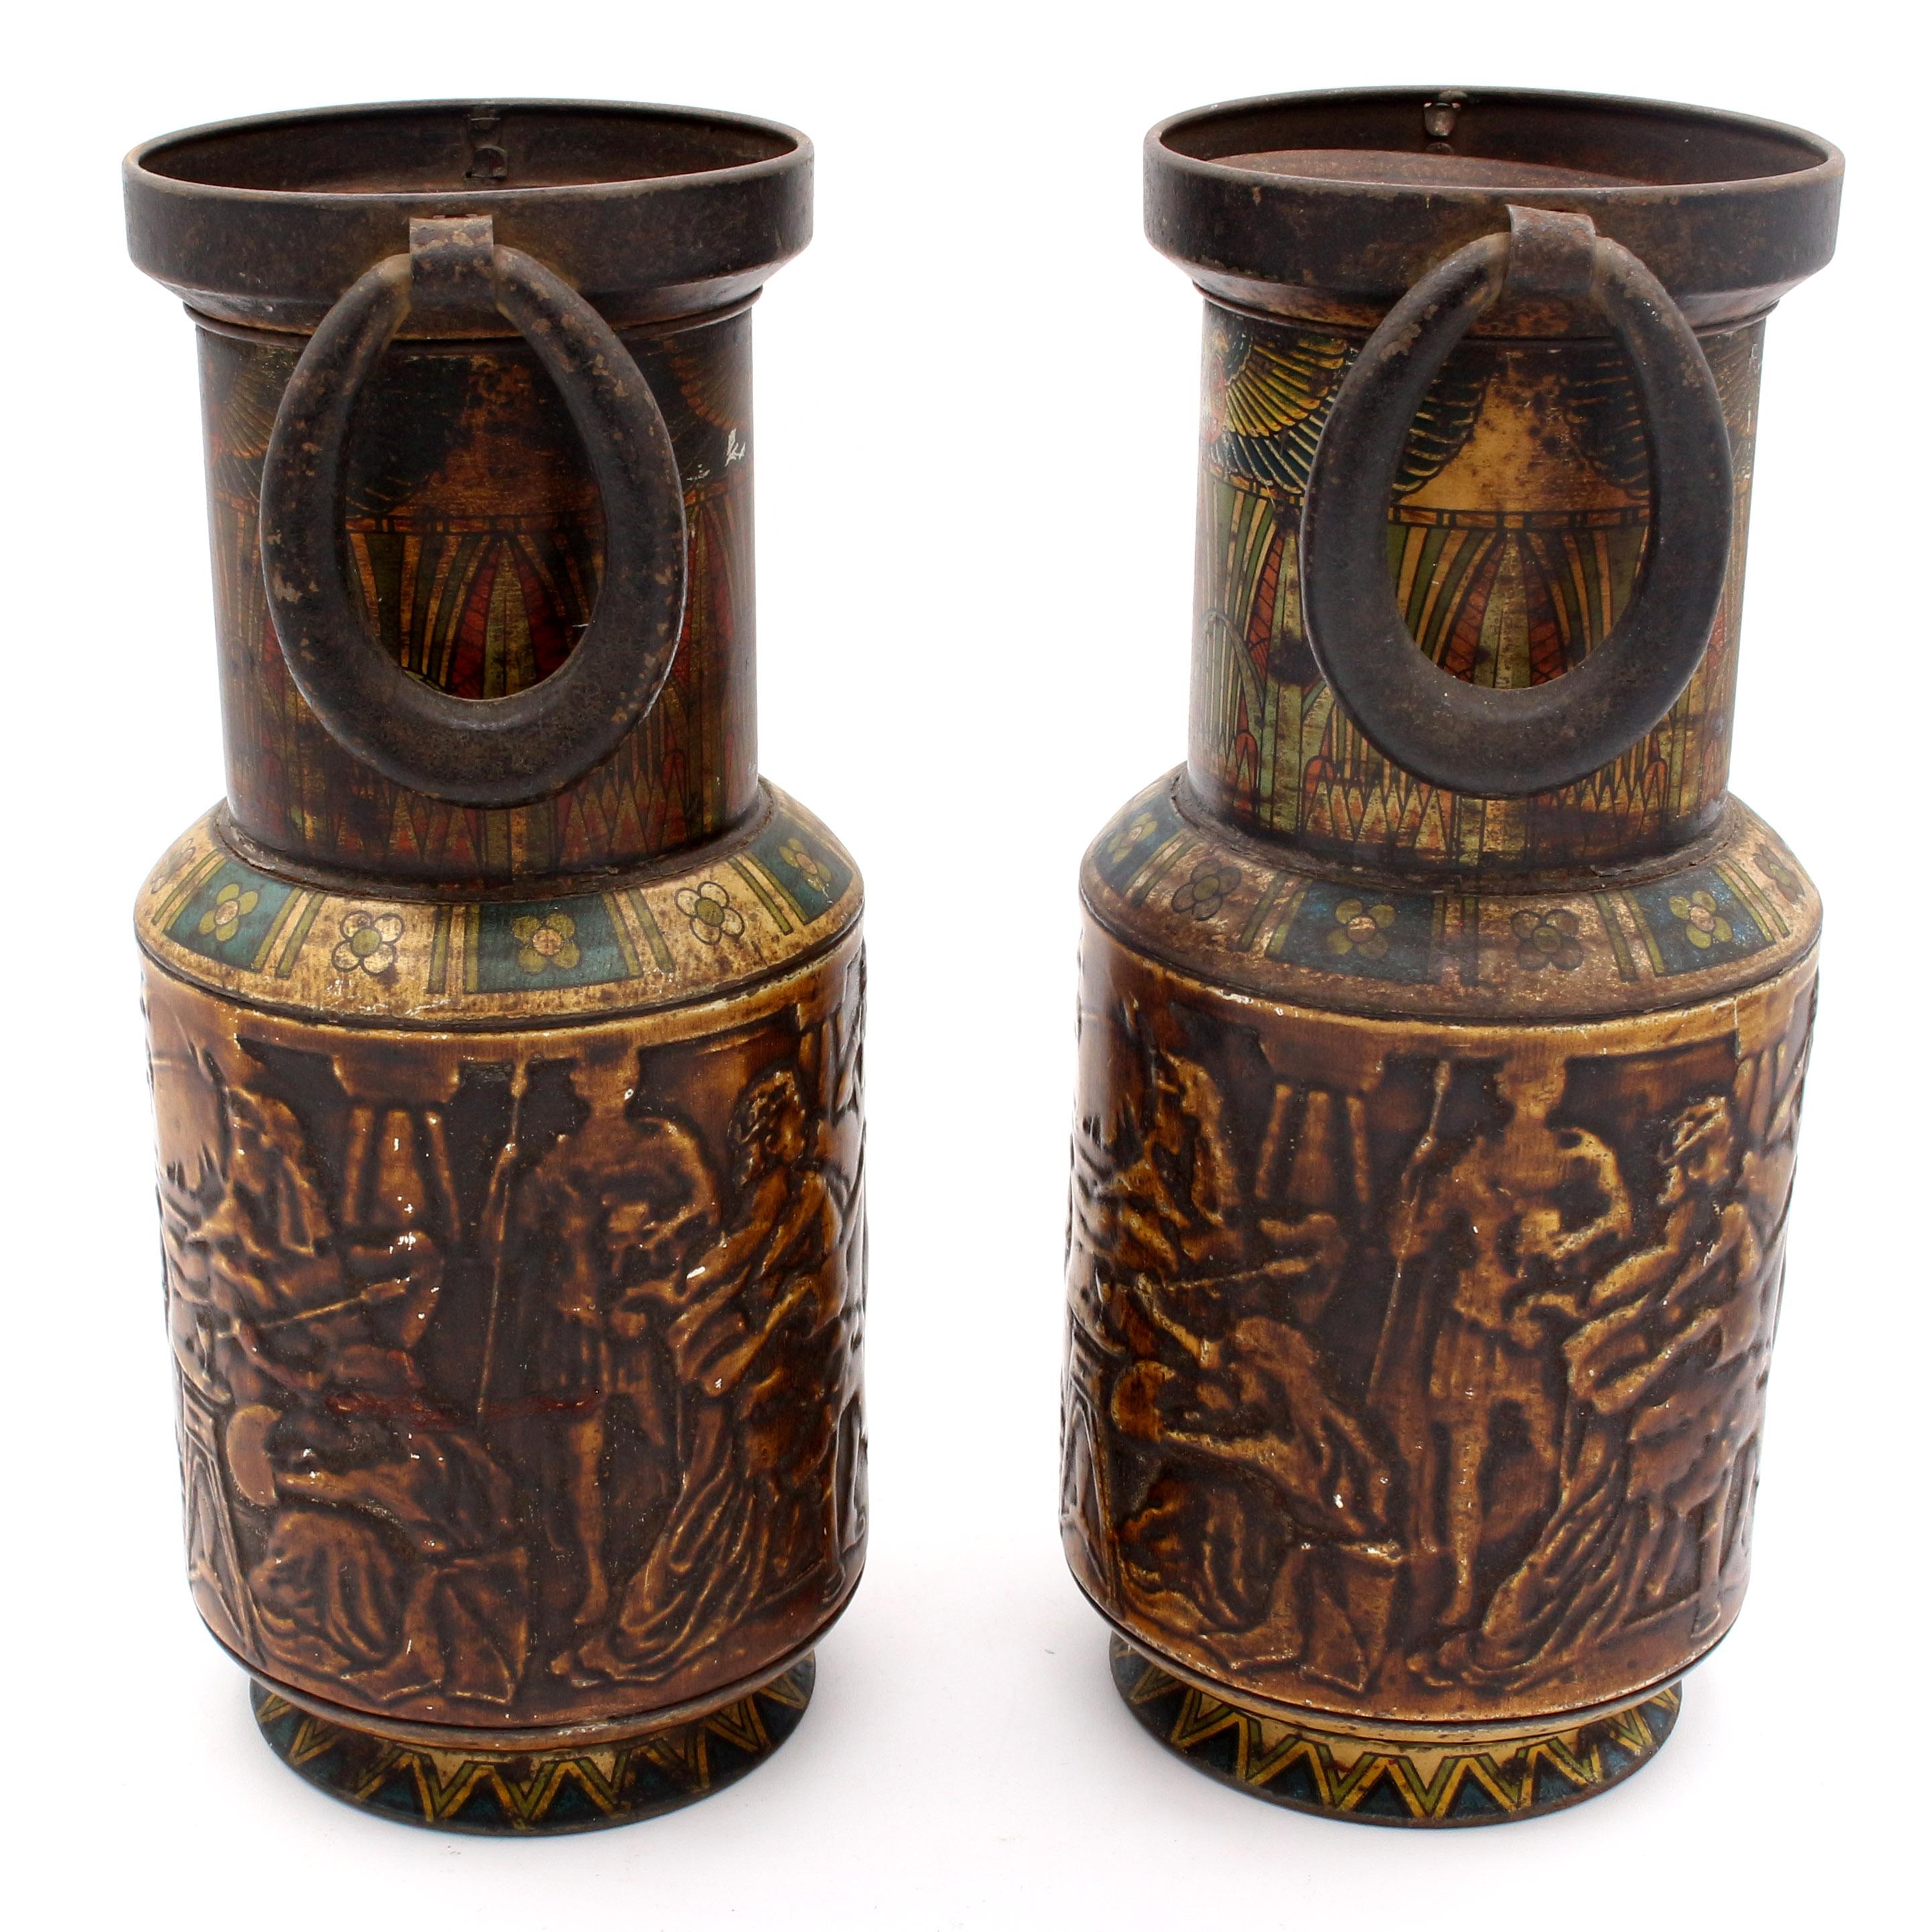 An unusual, exotic pair of Egyptian Revival Canopic Urns with Cleopatra embossed - actually bisquit tins by Huntley & Palmers, late 19th century.